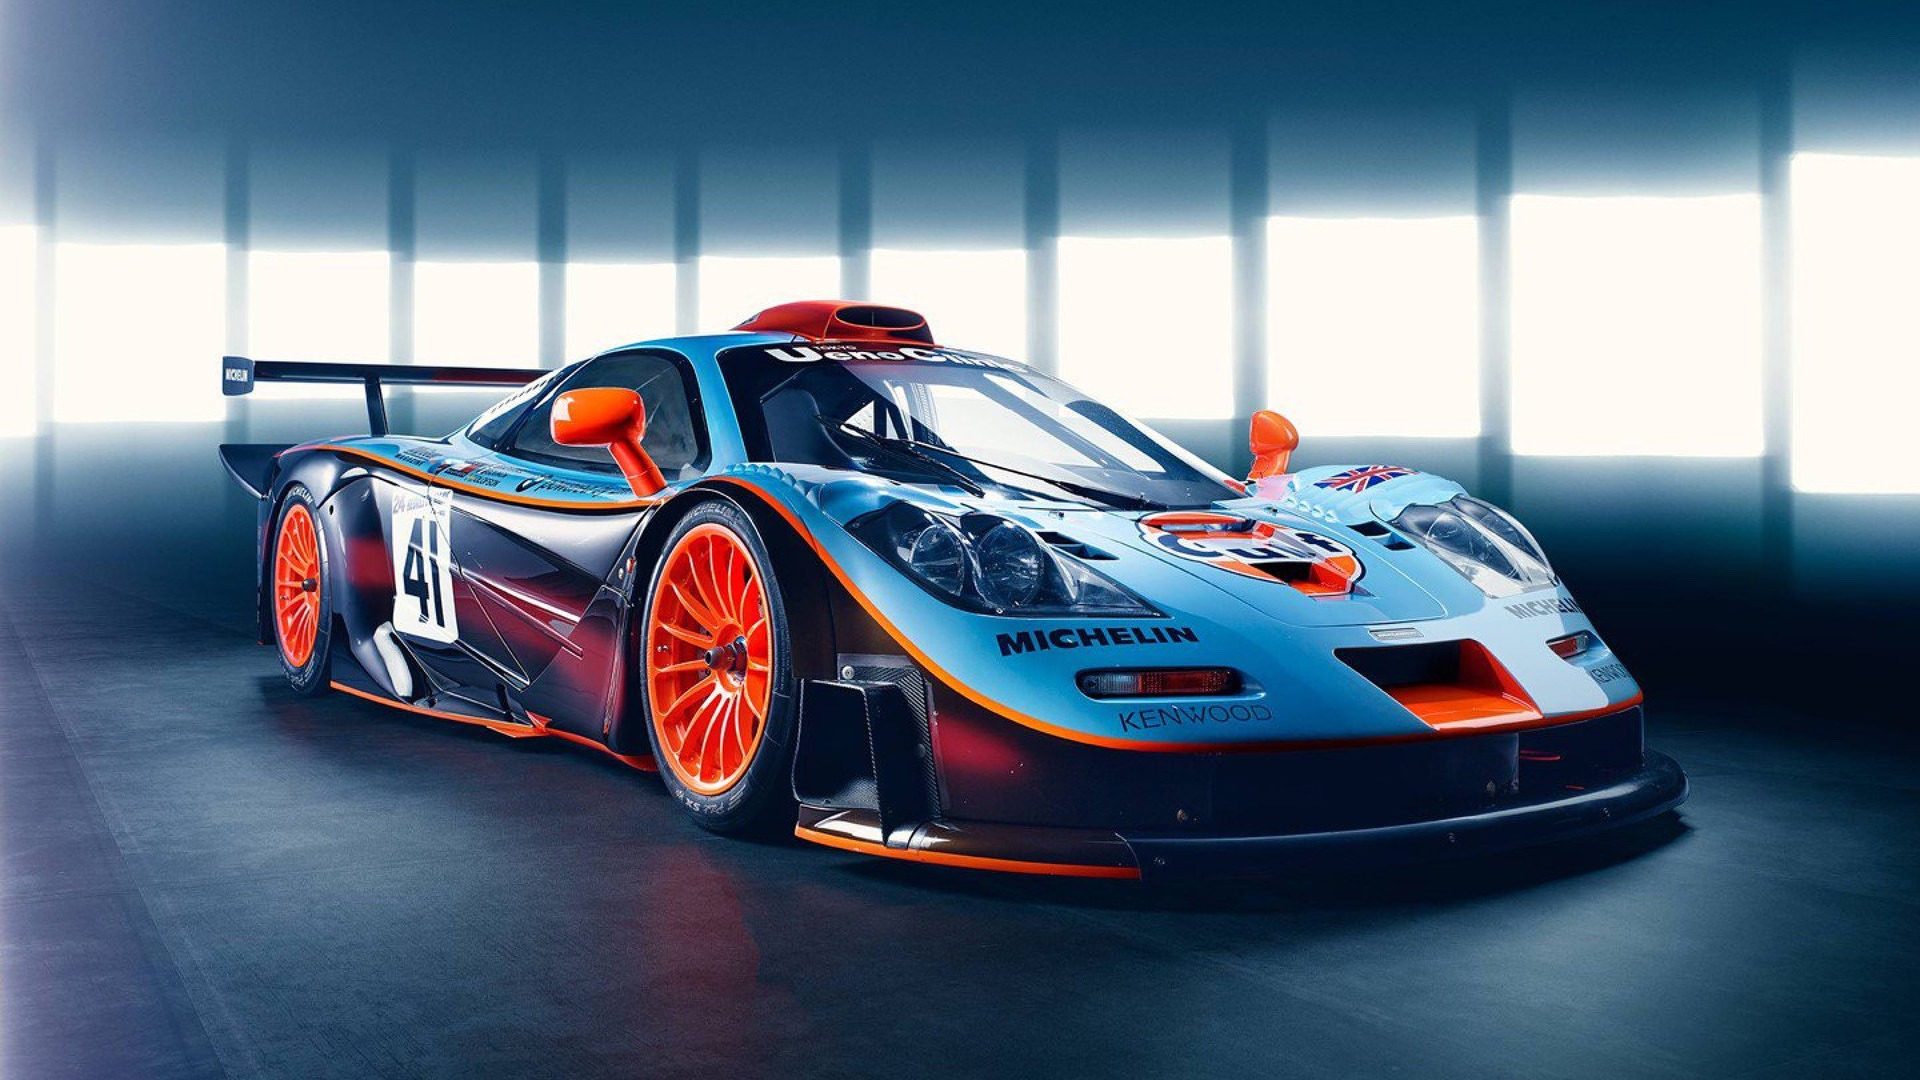 The McLaren F1 GTR dominated the FIA GT Championships until the CLK GTR arrived